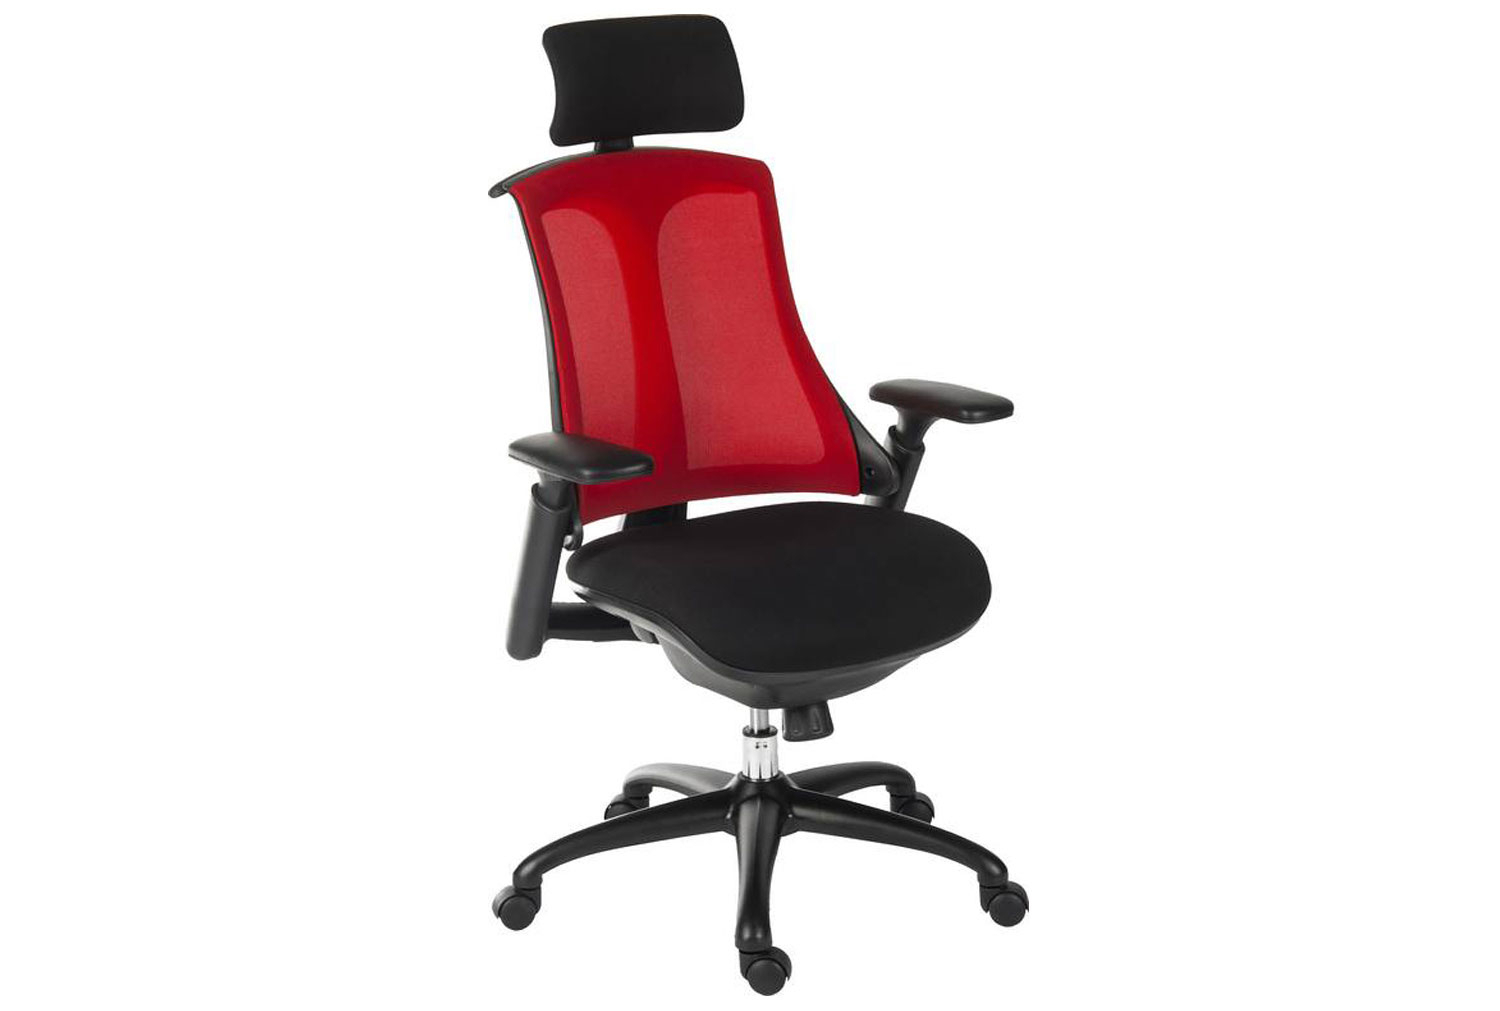 Amity Executive Mesh Back Office Chair (Red), Express Delivery